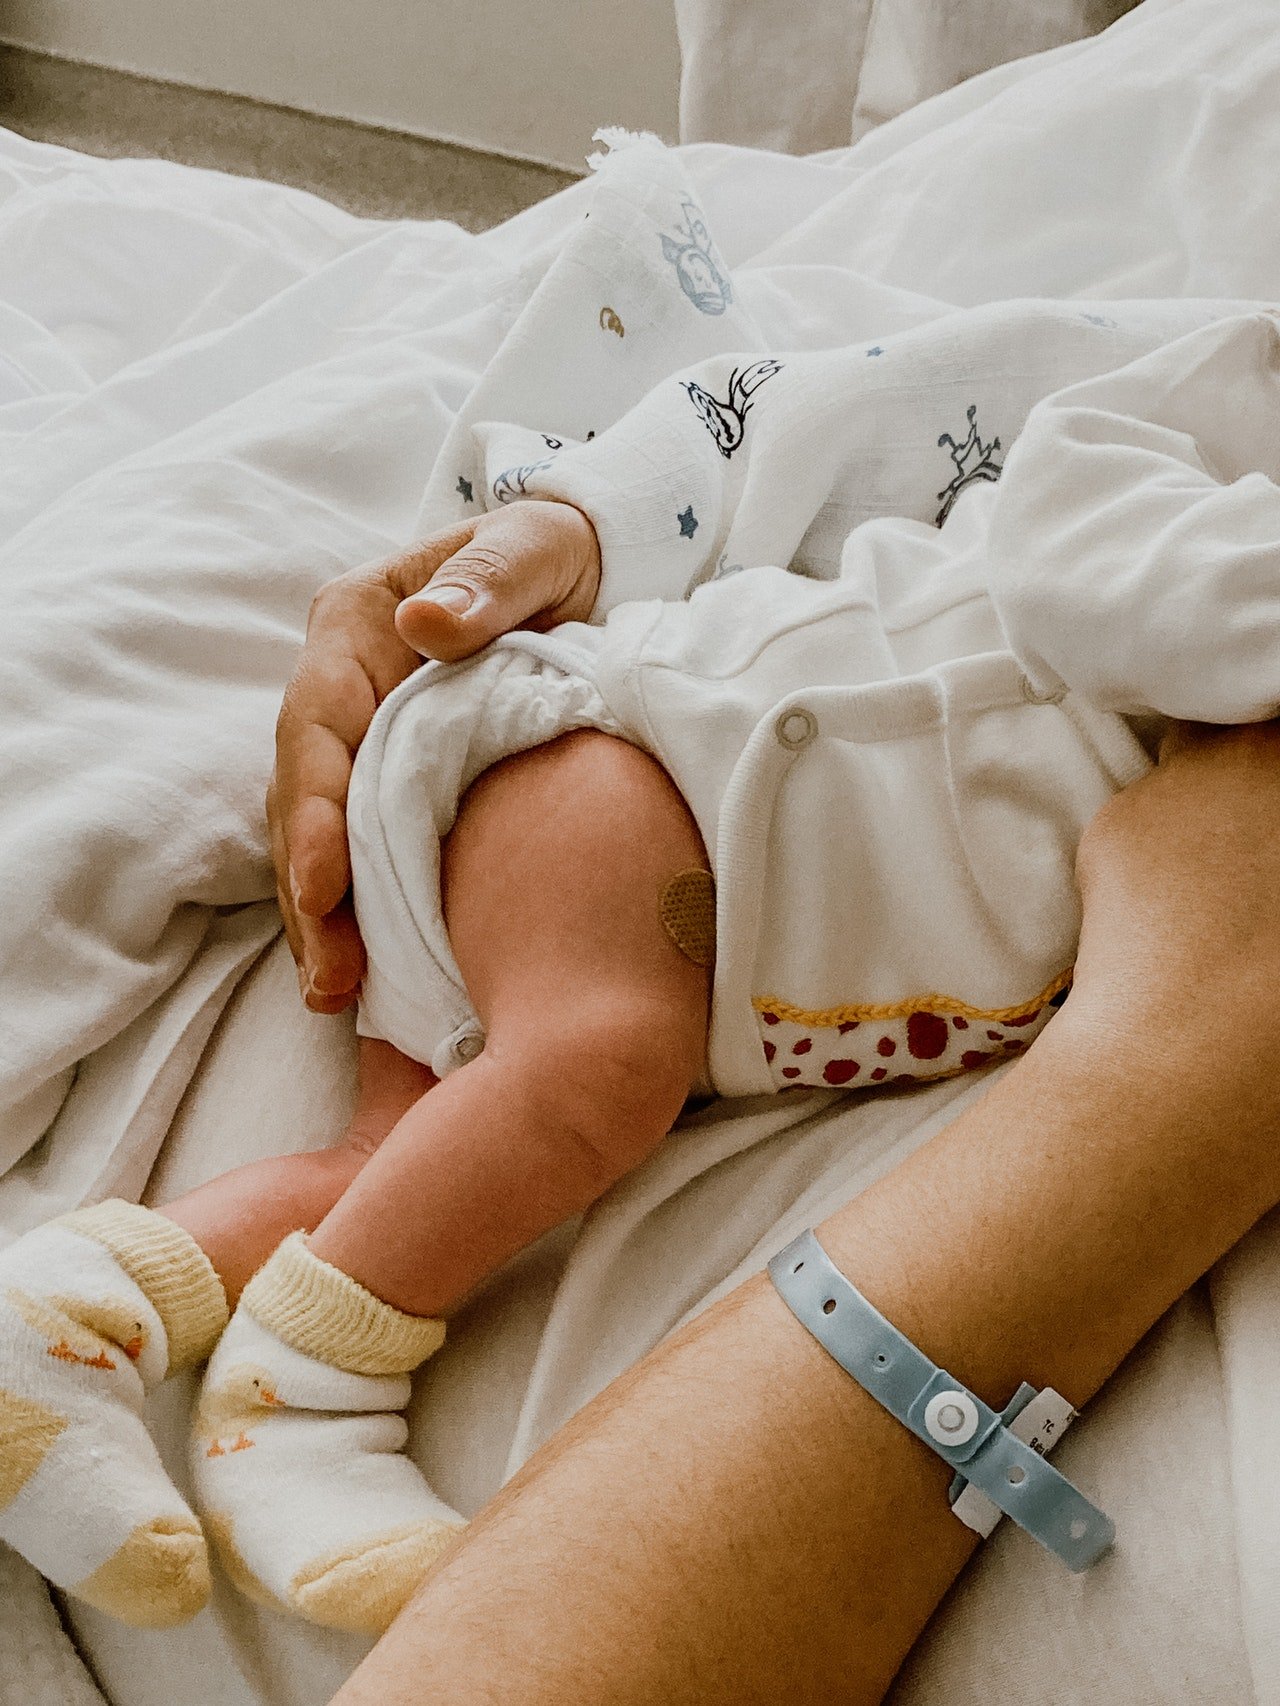 She gave birth and loved him, but they took him away. | Source: Pexels